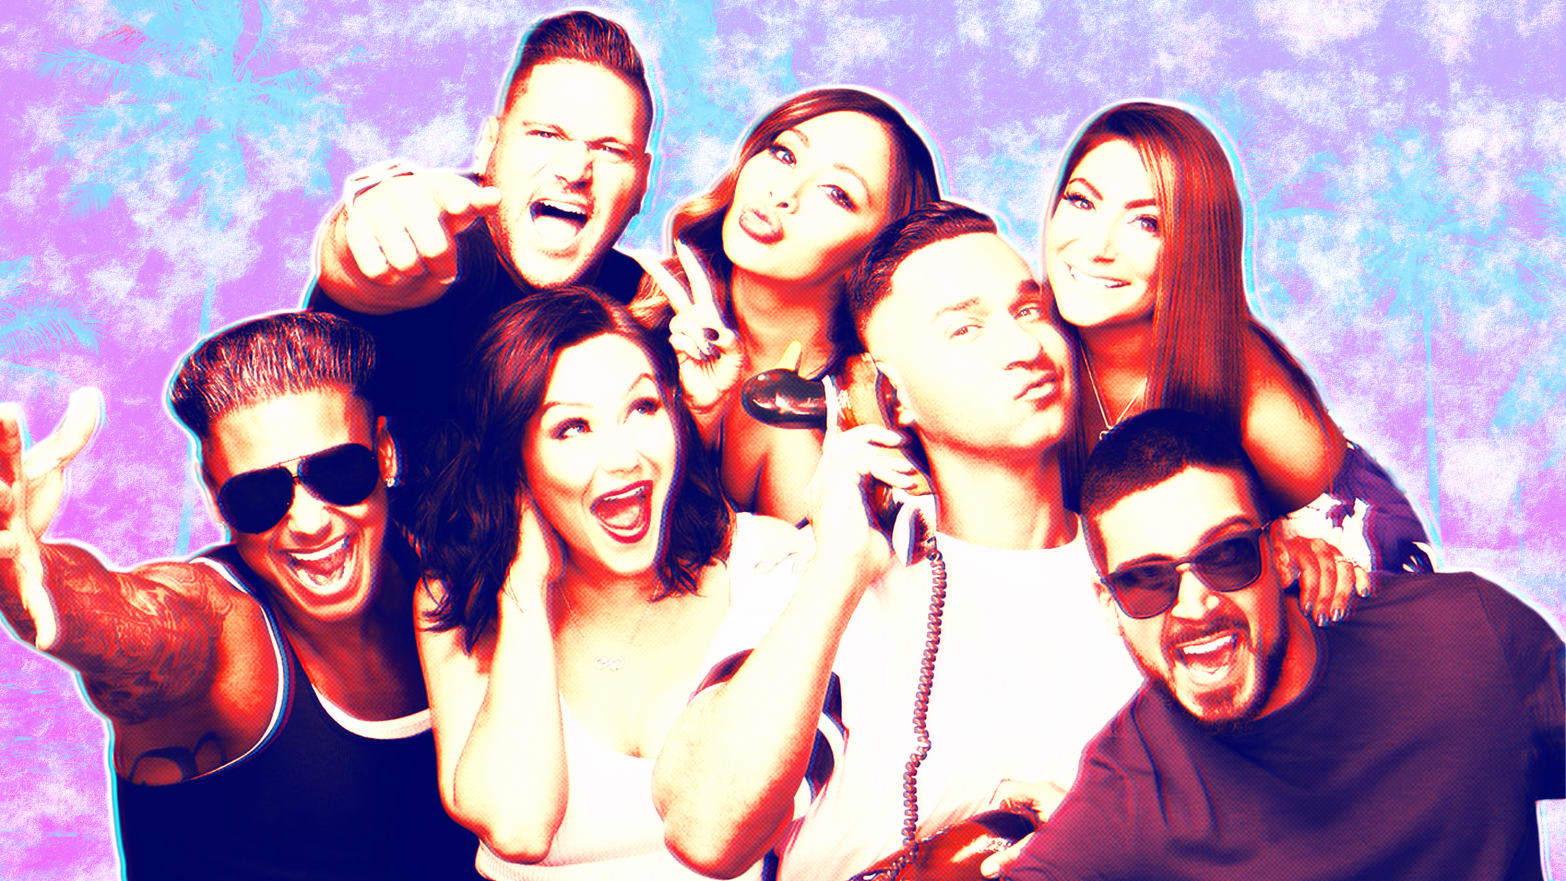 A photo illustration of the cast from the first season of MTV’s Jersey Shore.